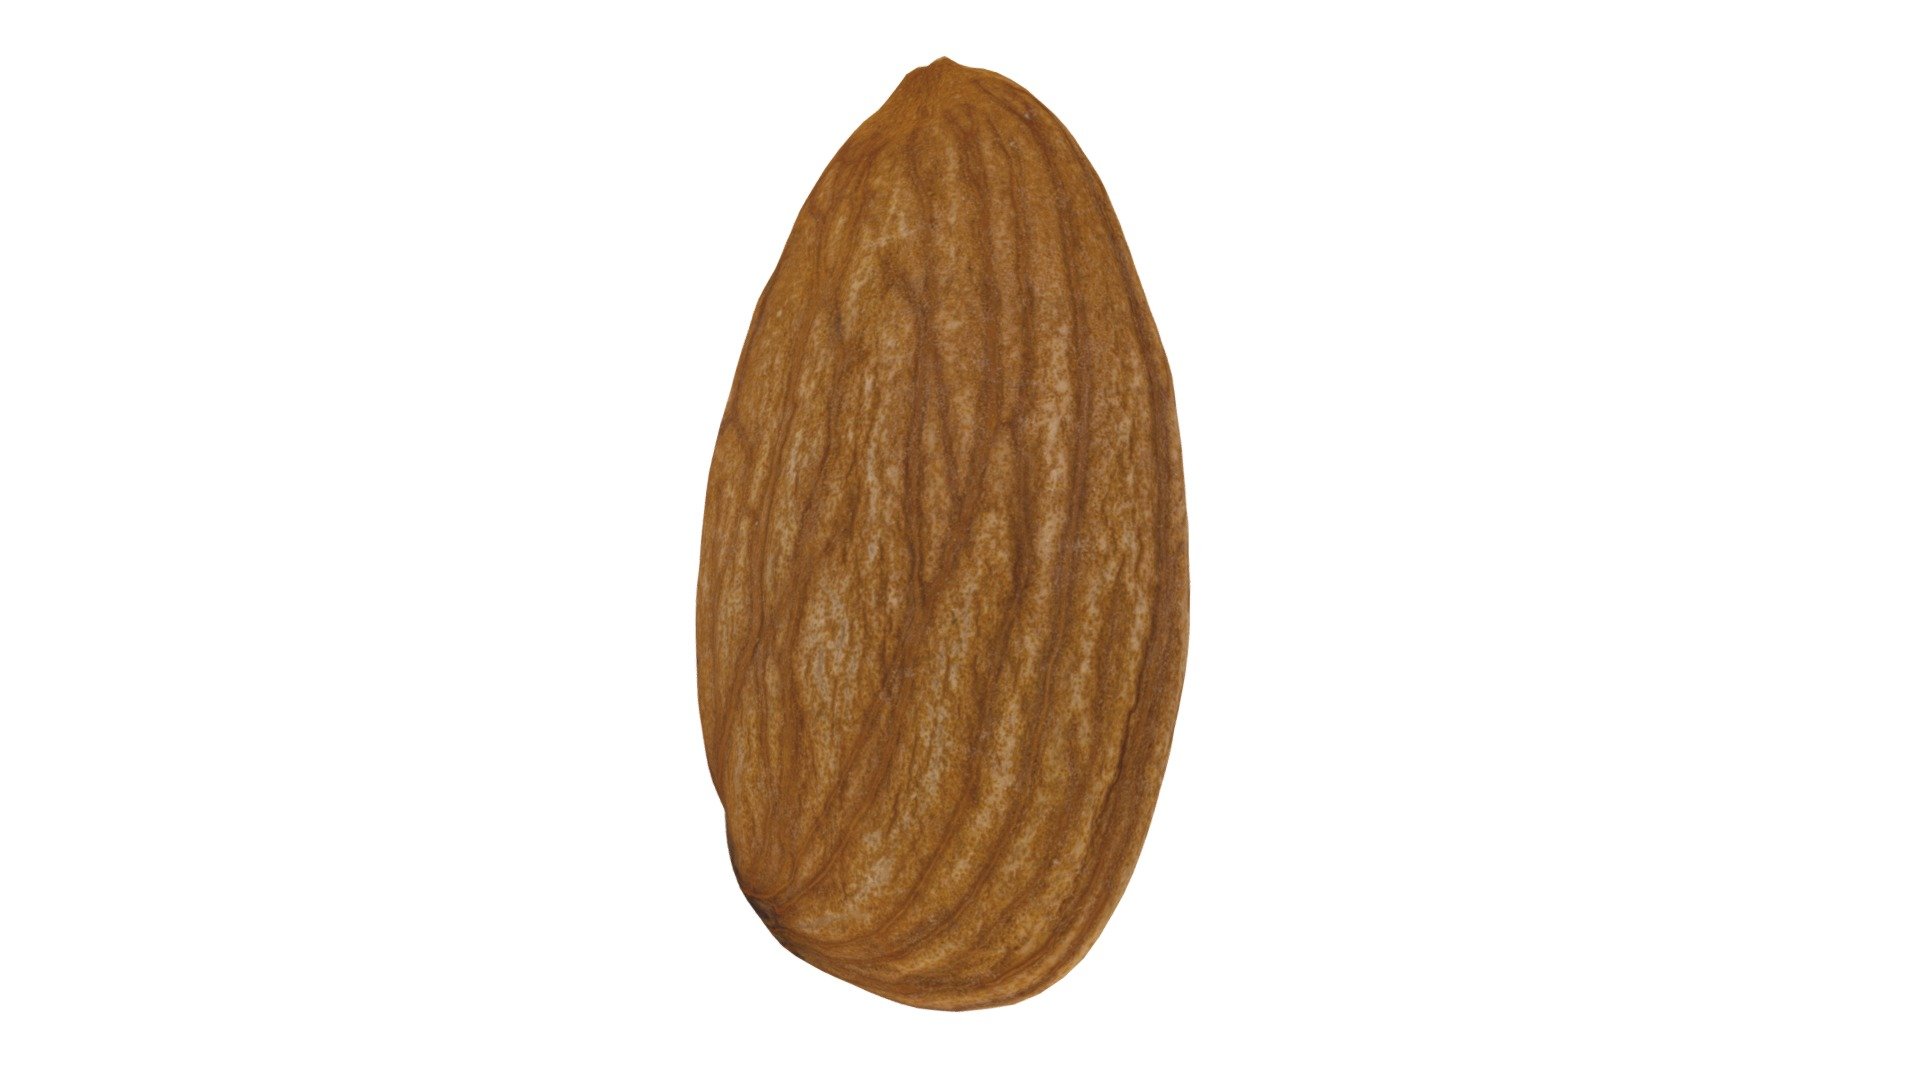 Highly detailed, photorealistic, 3d scanned model of an almond. 8k textures maps, optimized topology and uv unwrapped.

Model shown here is lowpoly with diffuse map only and 4k texture size.

This model is available at www.thecreativecrops.com 3d model